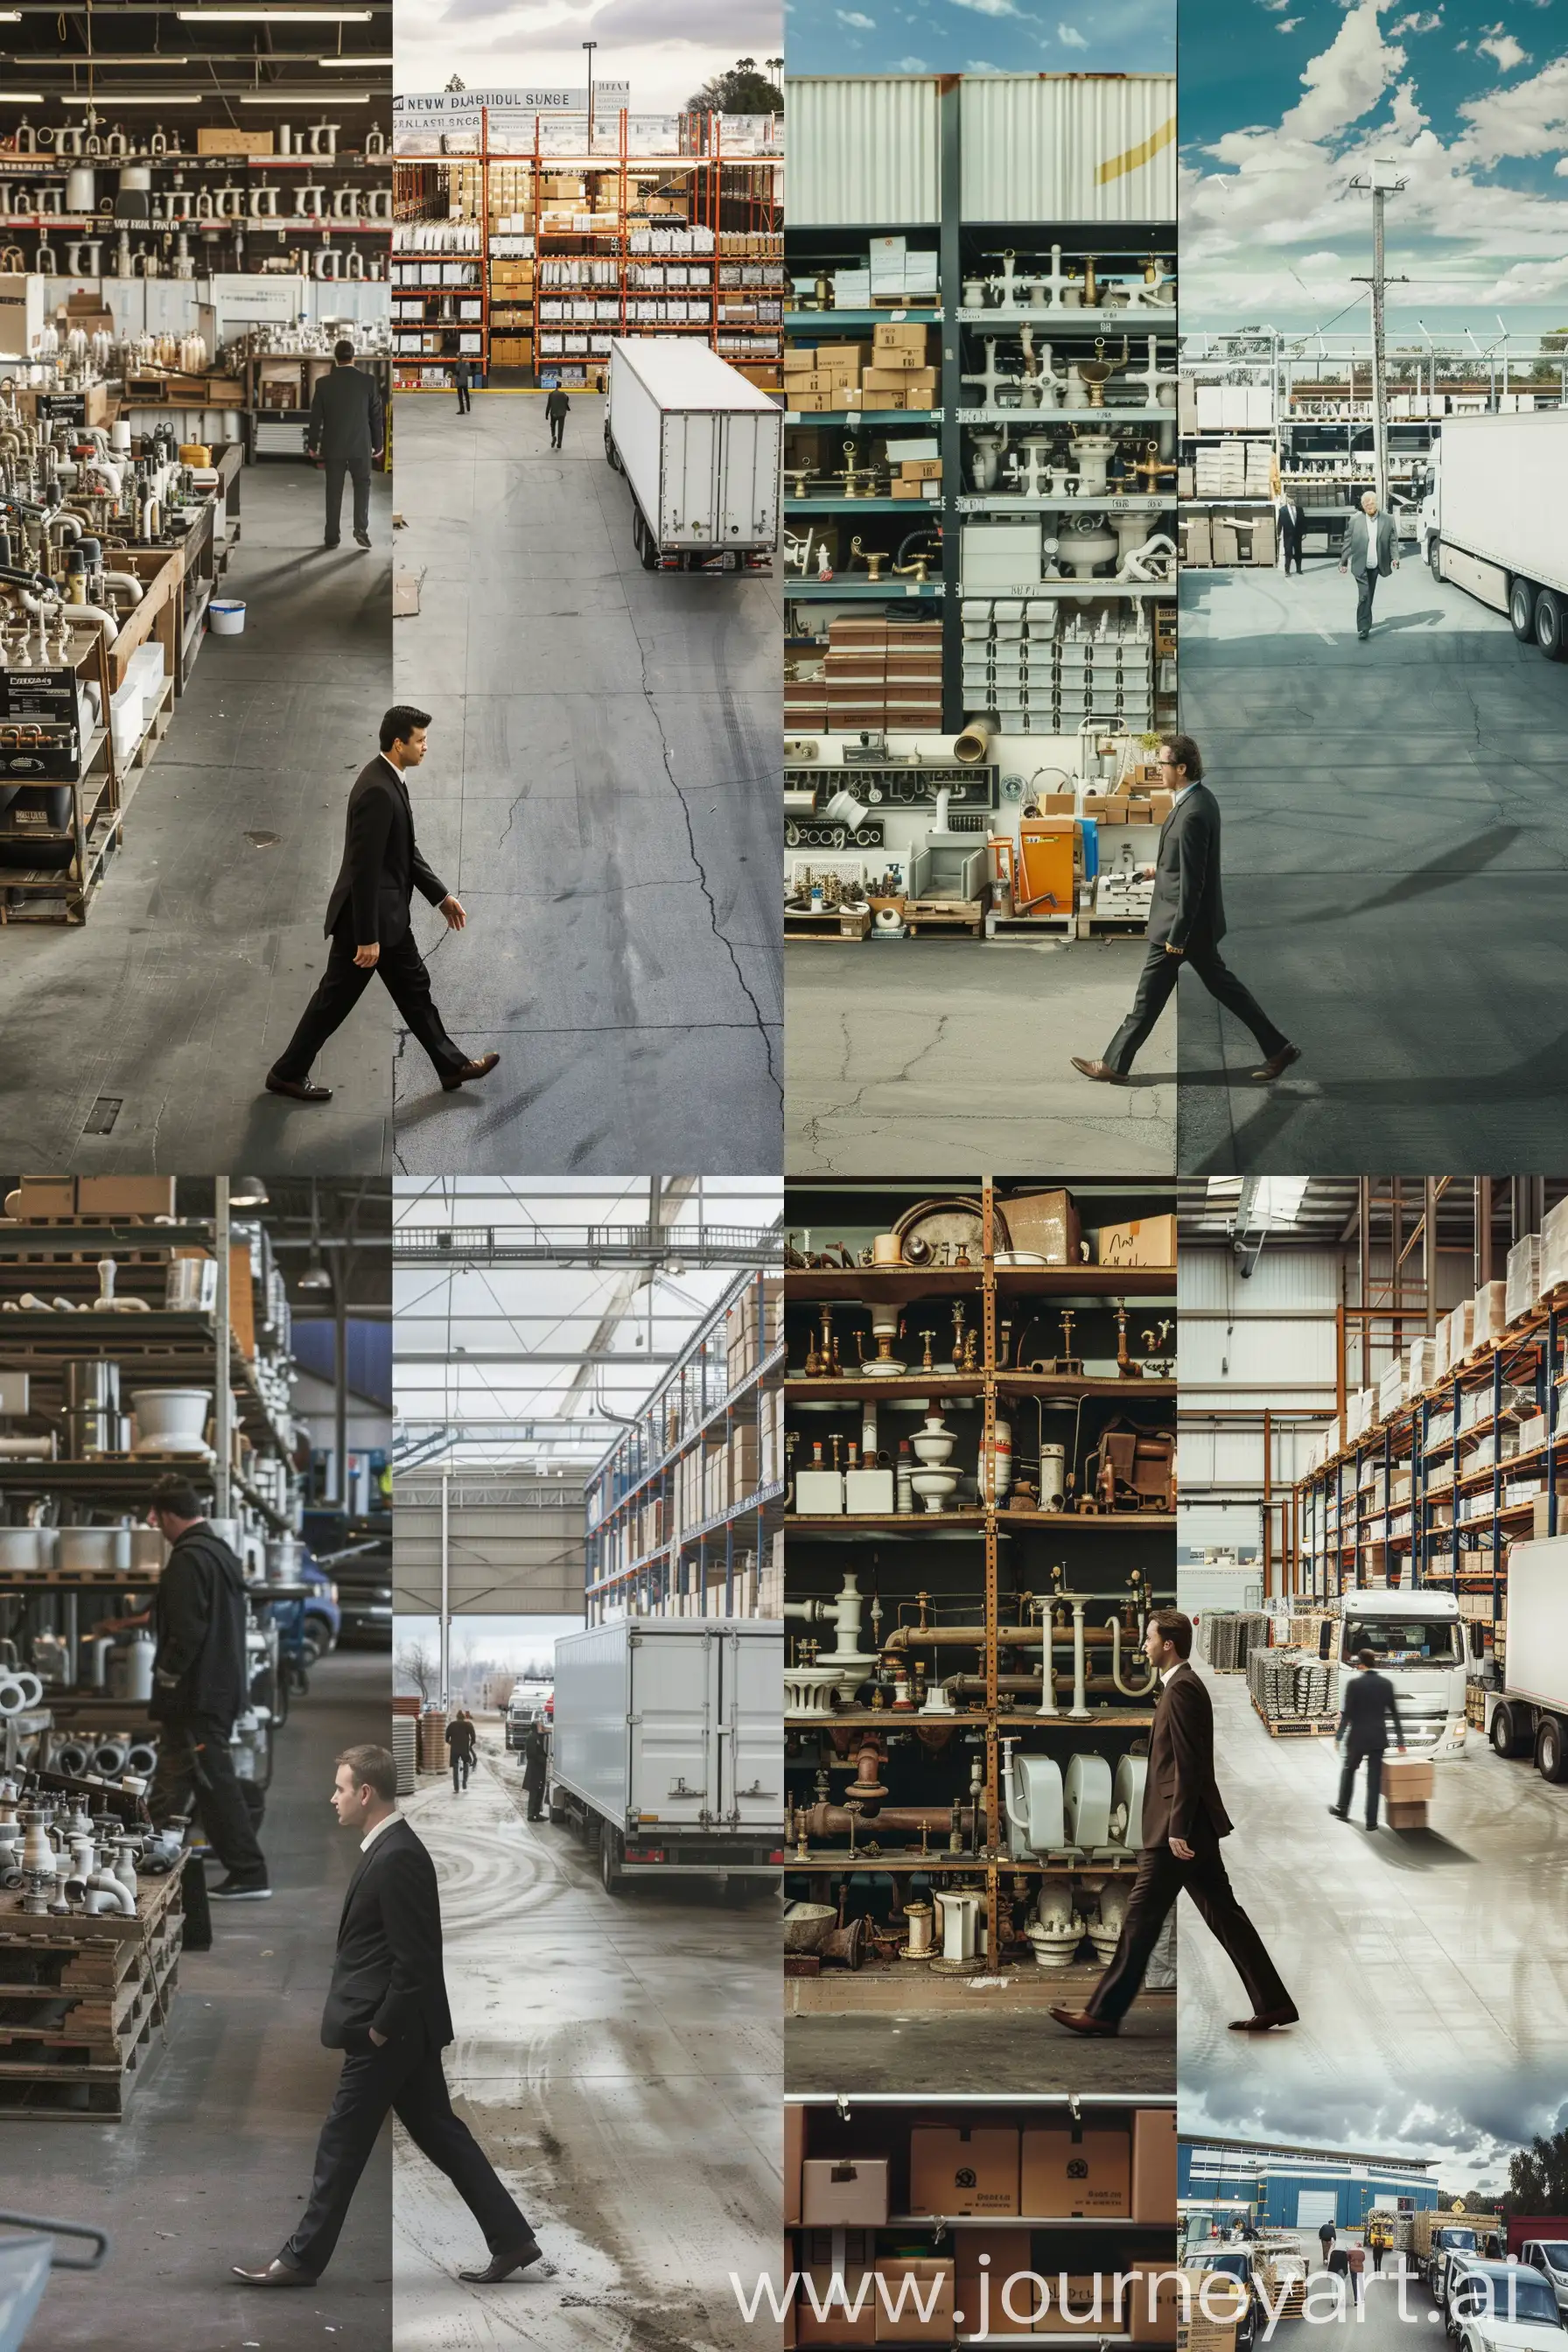 The image is divided into two parts vertically. A one man in a suit is walking from left to right on center, crossing this border. On the left, a flea market is shown where sellers are selling old plumbing. On the right is a warehouse with a view from inside the building, an automated new white plumbing warehouse inside, surrounded by shelves, where all the new plumbing goods are neatly arranged, the floor is clean, and a truck is unloading to the warehouse where employees are carrying boxes --ar 4:6 --v 6